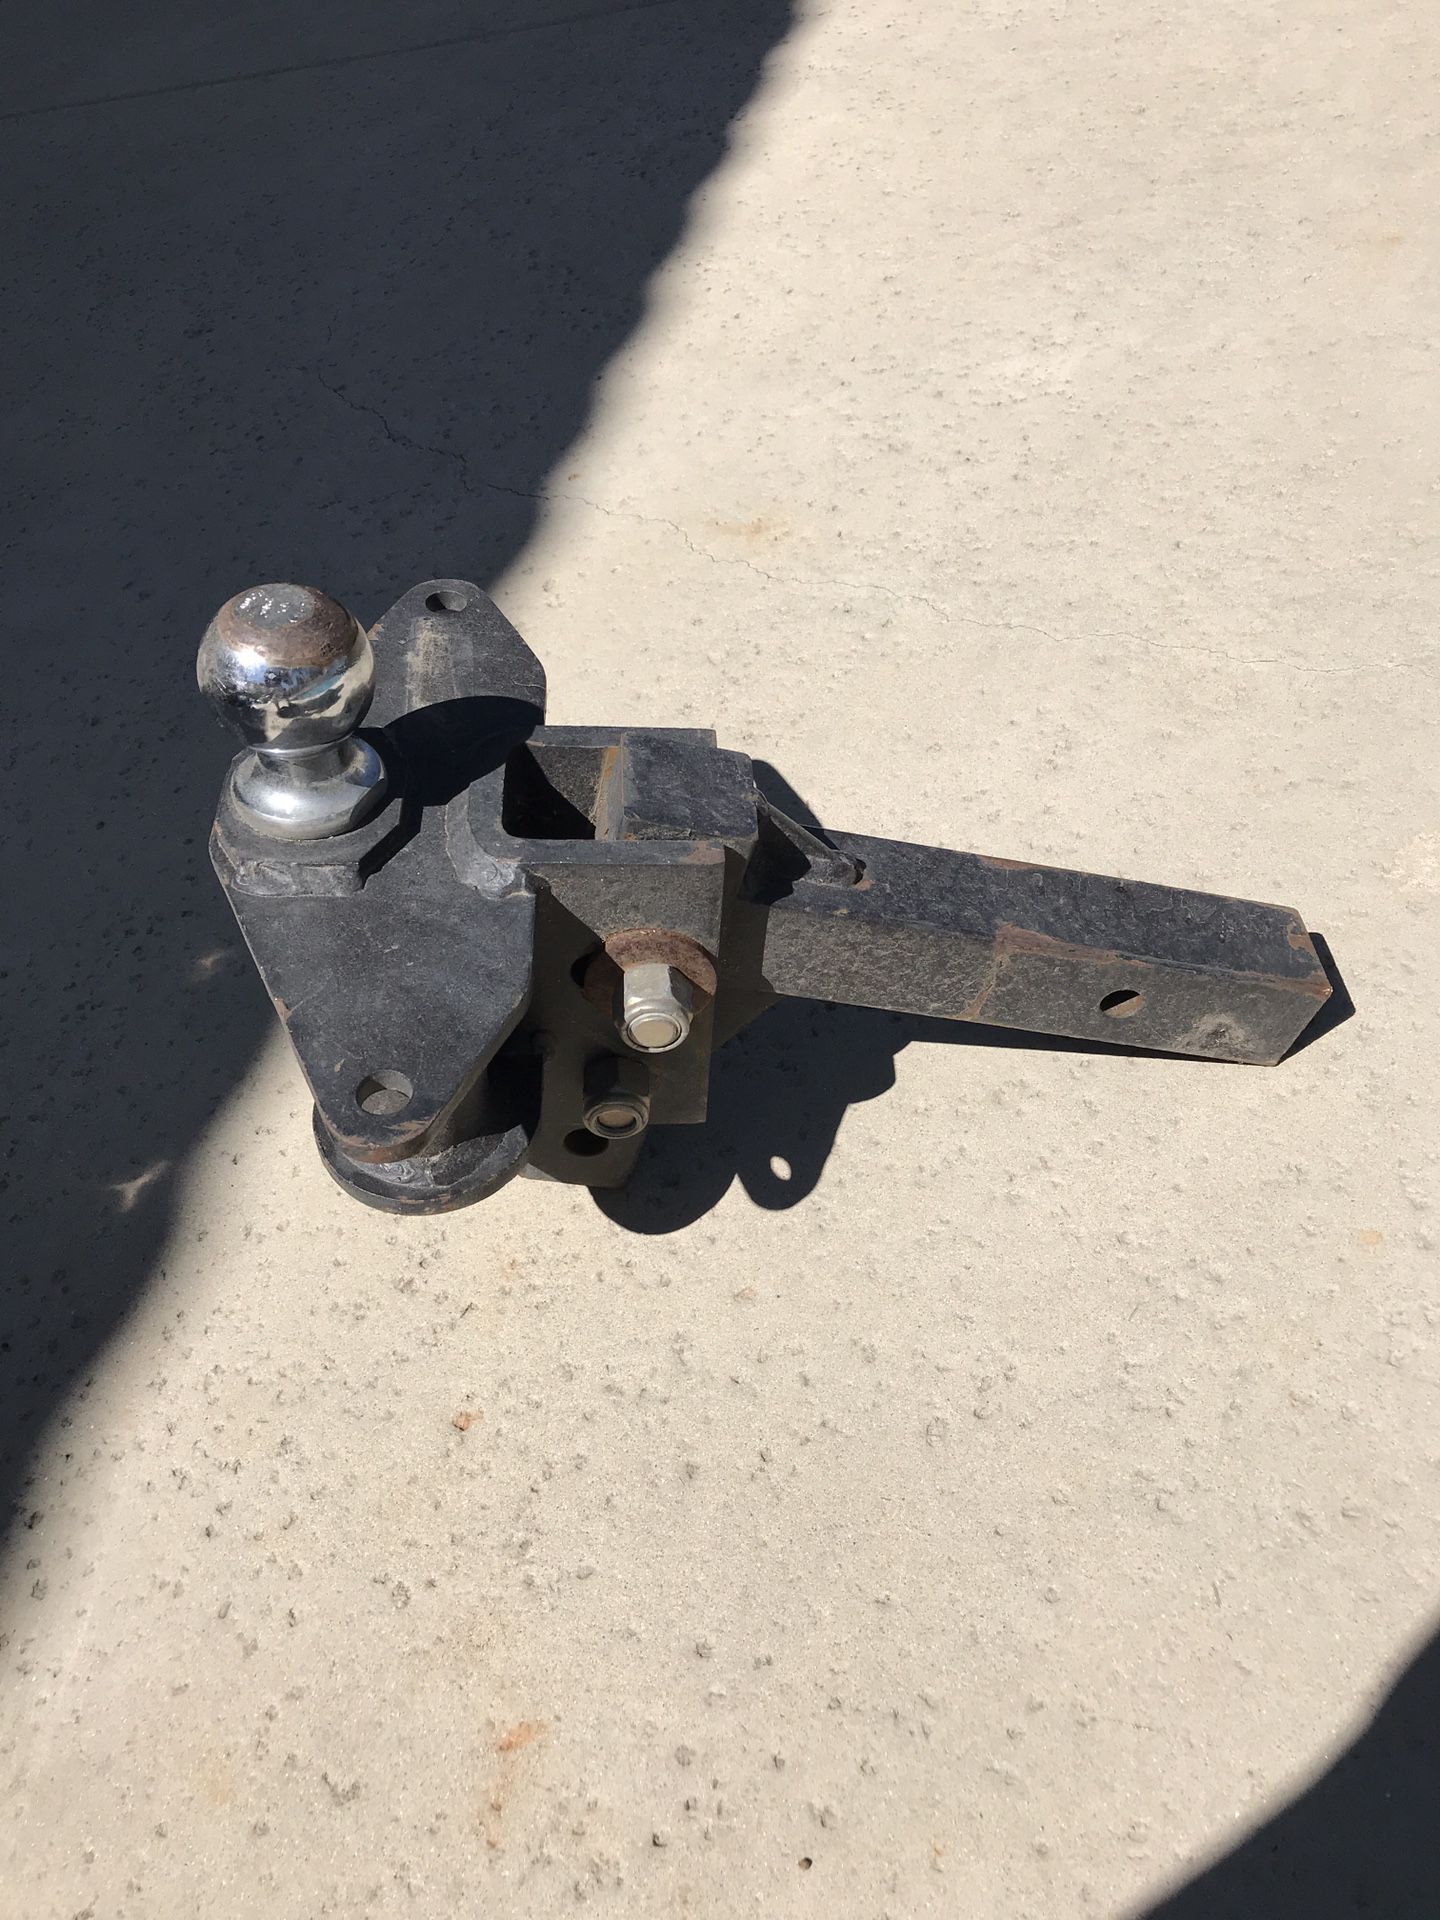 Tow hitch for trailers